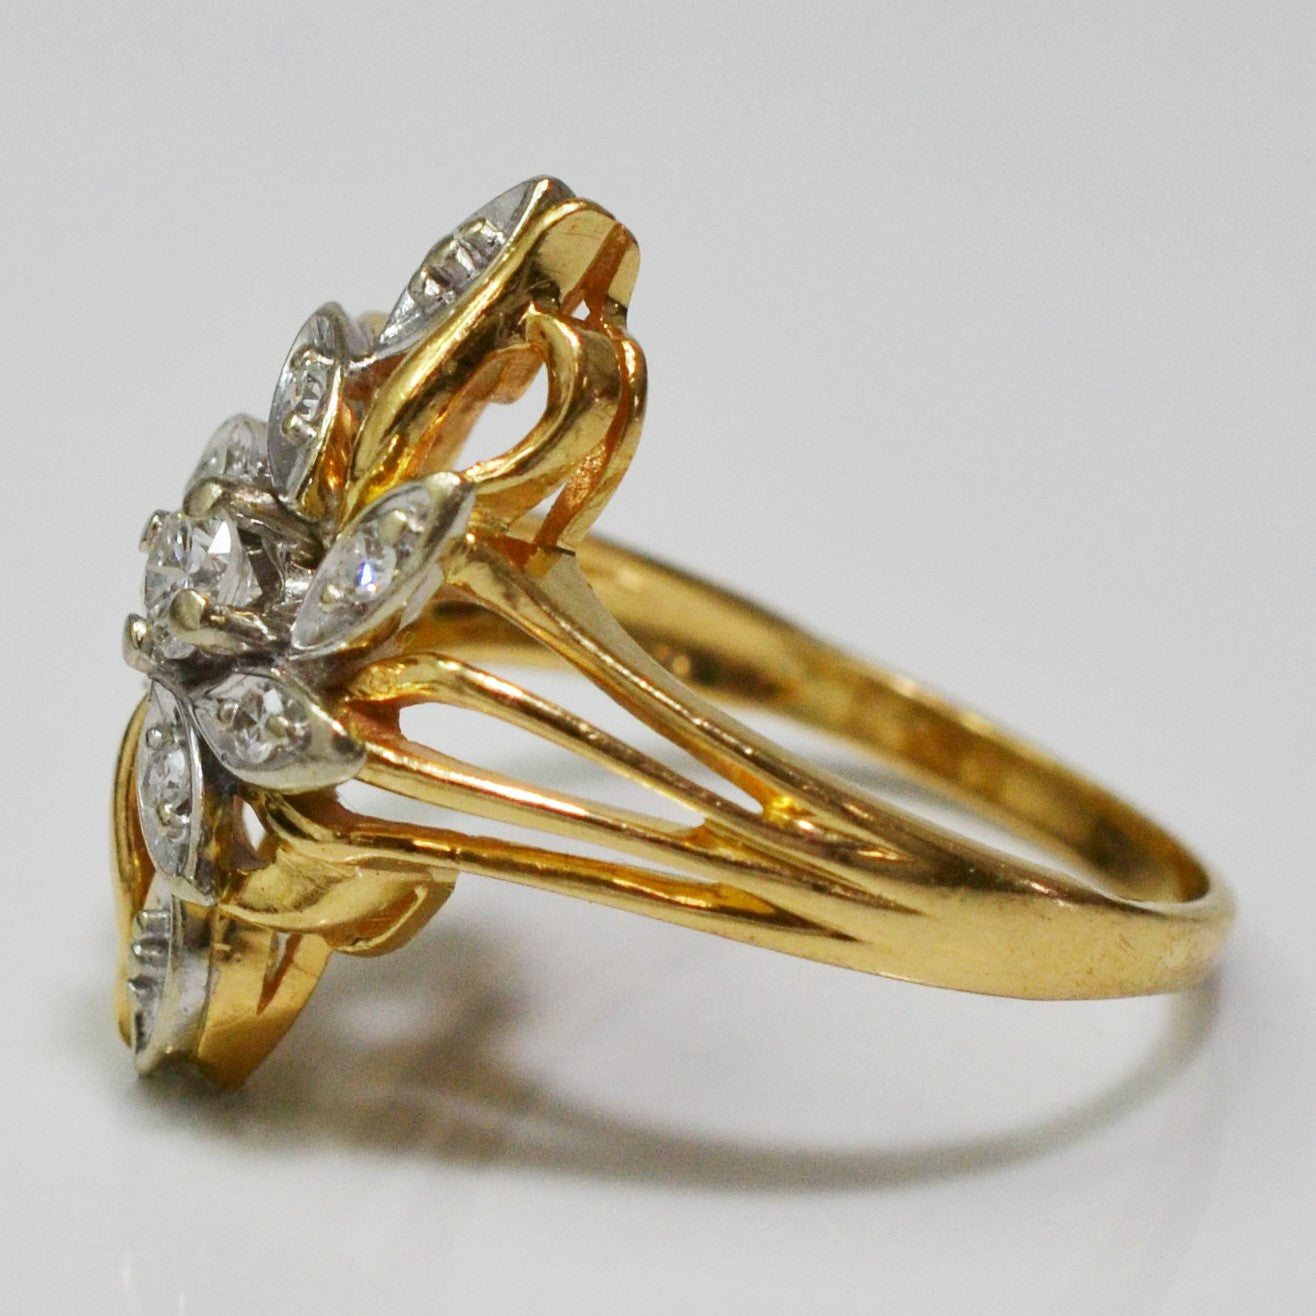 Floral Inspired Diamond Ring | 0.25ctw | SZ 7.75 |